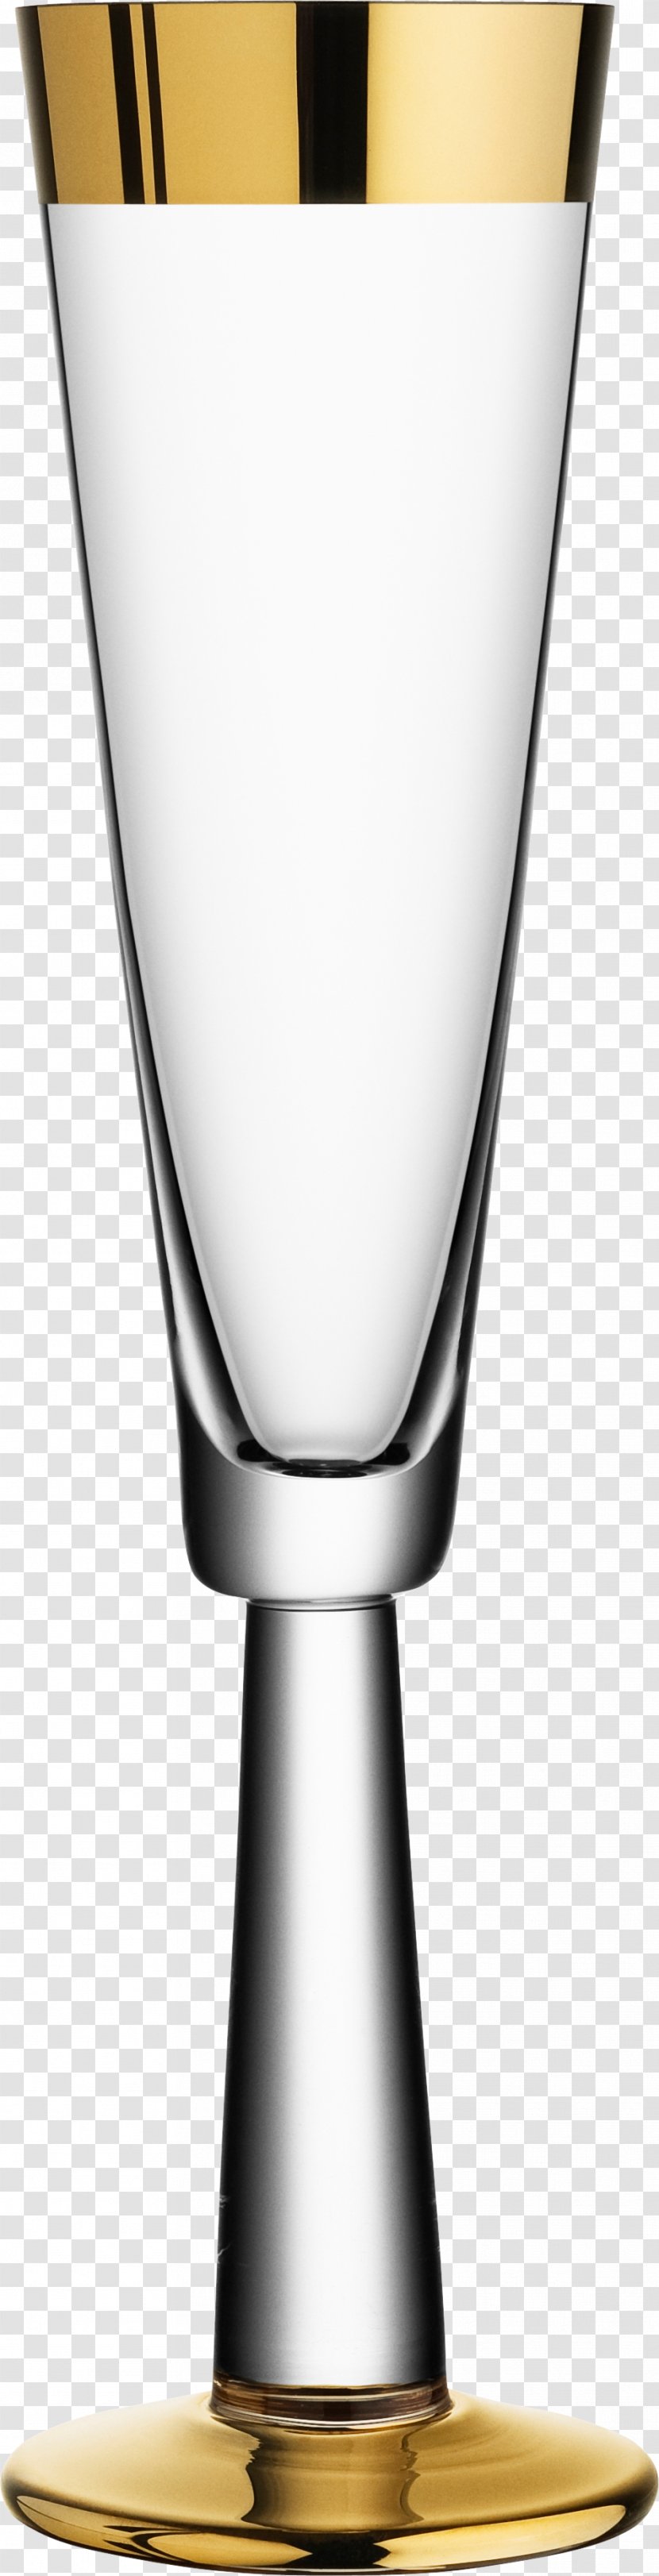 Wine Glass Cup Champagne Rummer - Trophy - Matting Transparent PNG